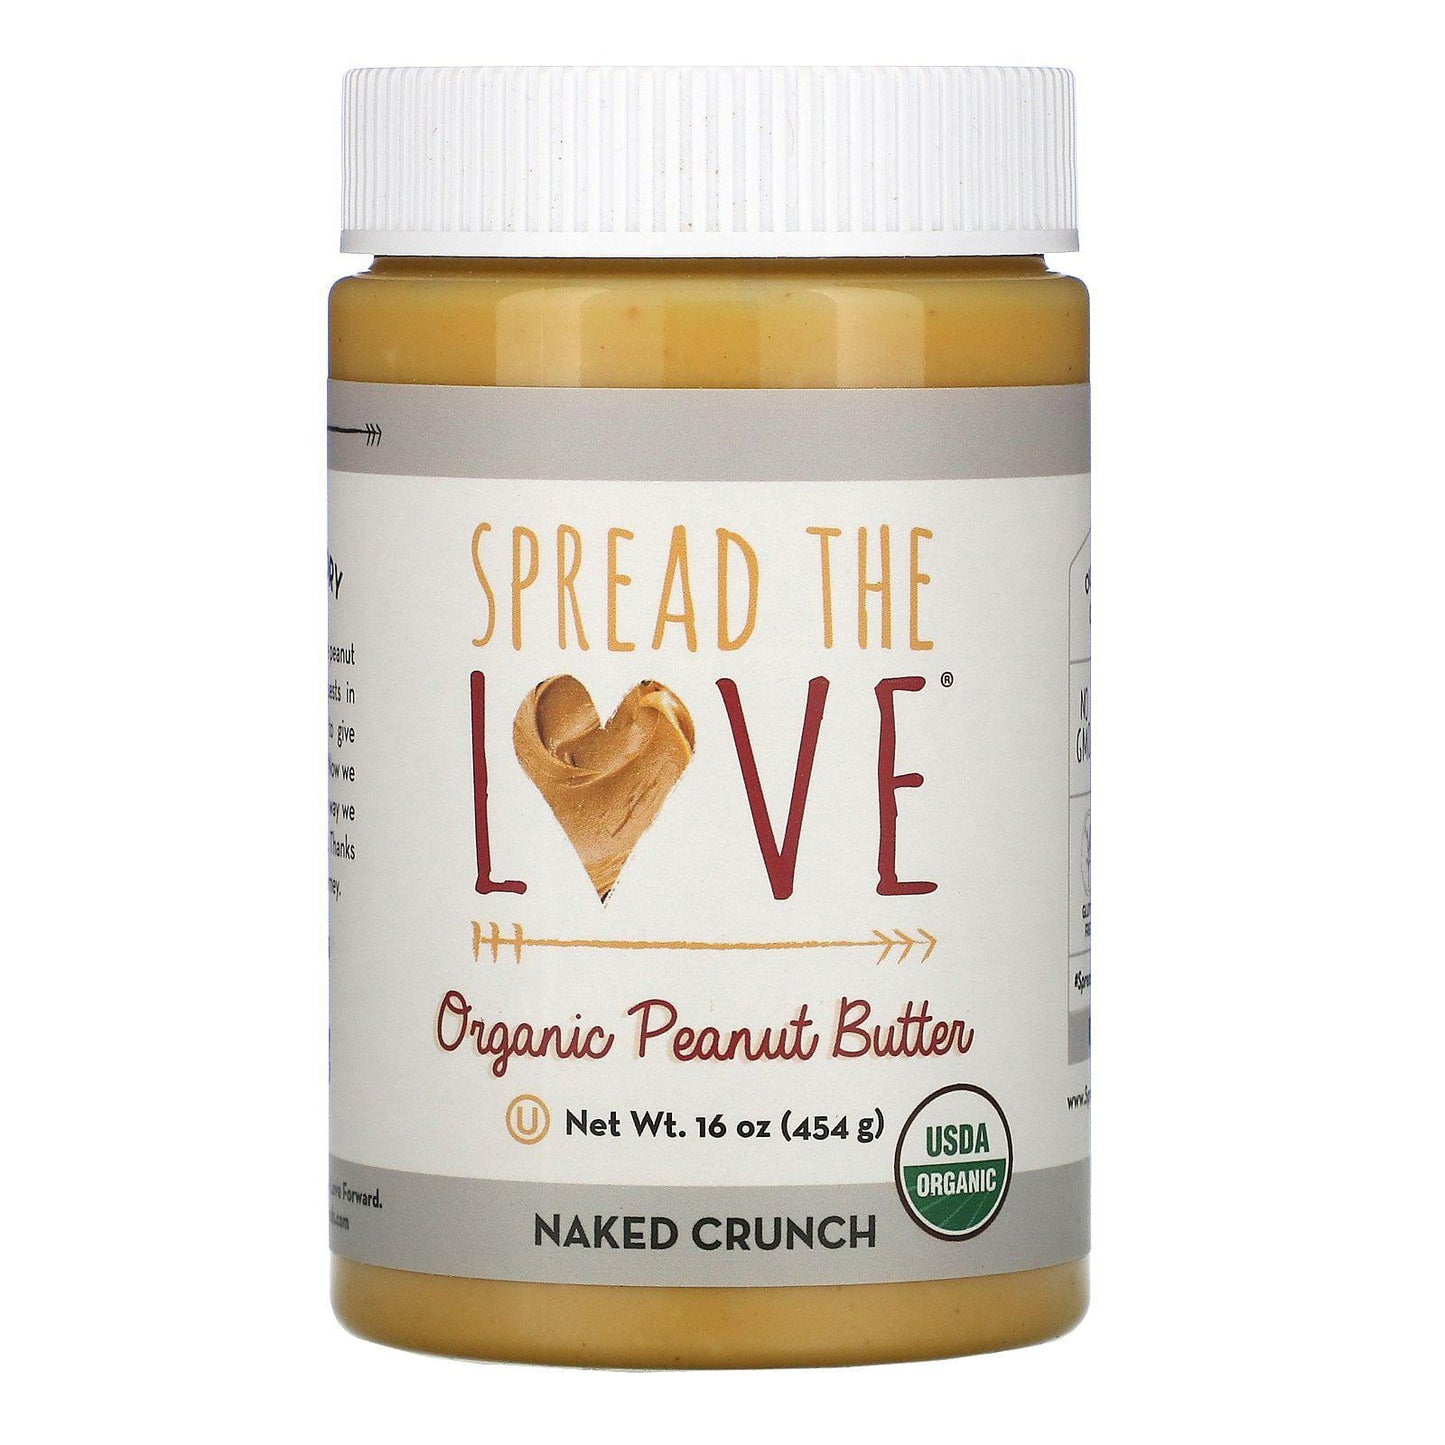 Spread The Love - 'NAKED CRUNCH' Organic Peanut Butter (16OZ)